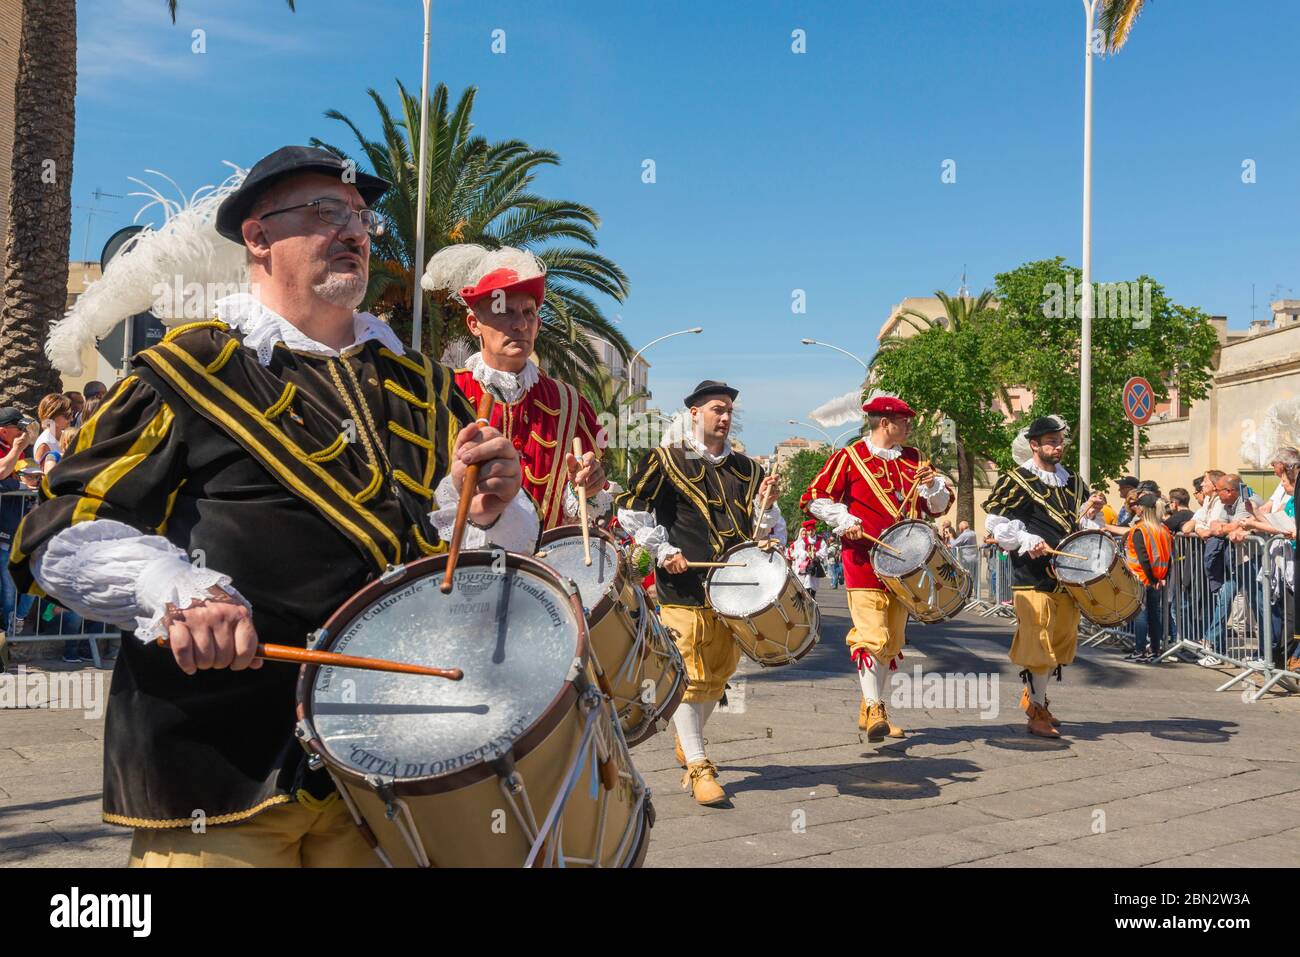 Sardinia festival, view of a group of drummers in Sardinian traditional dress  marching in the grand procession during Cavalcata in Sassari, Sardinia. Stock Photo